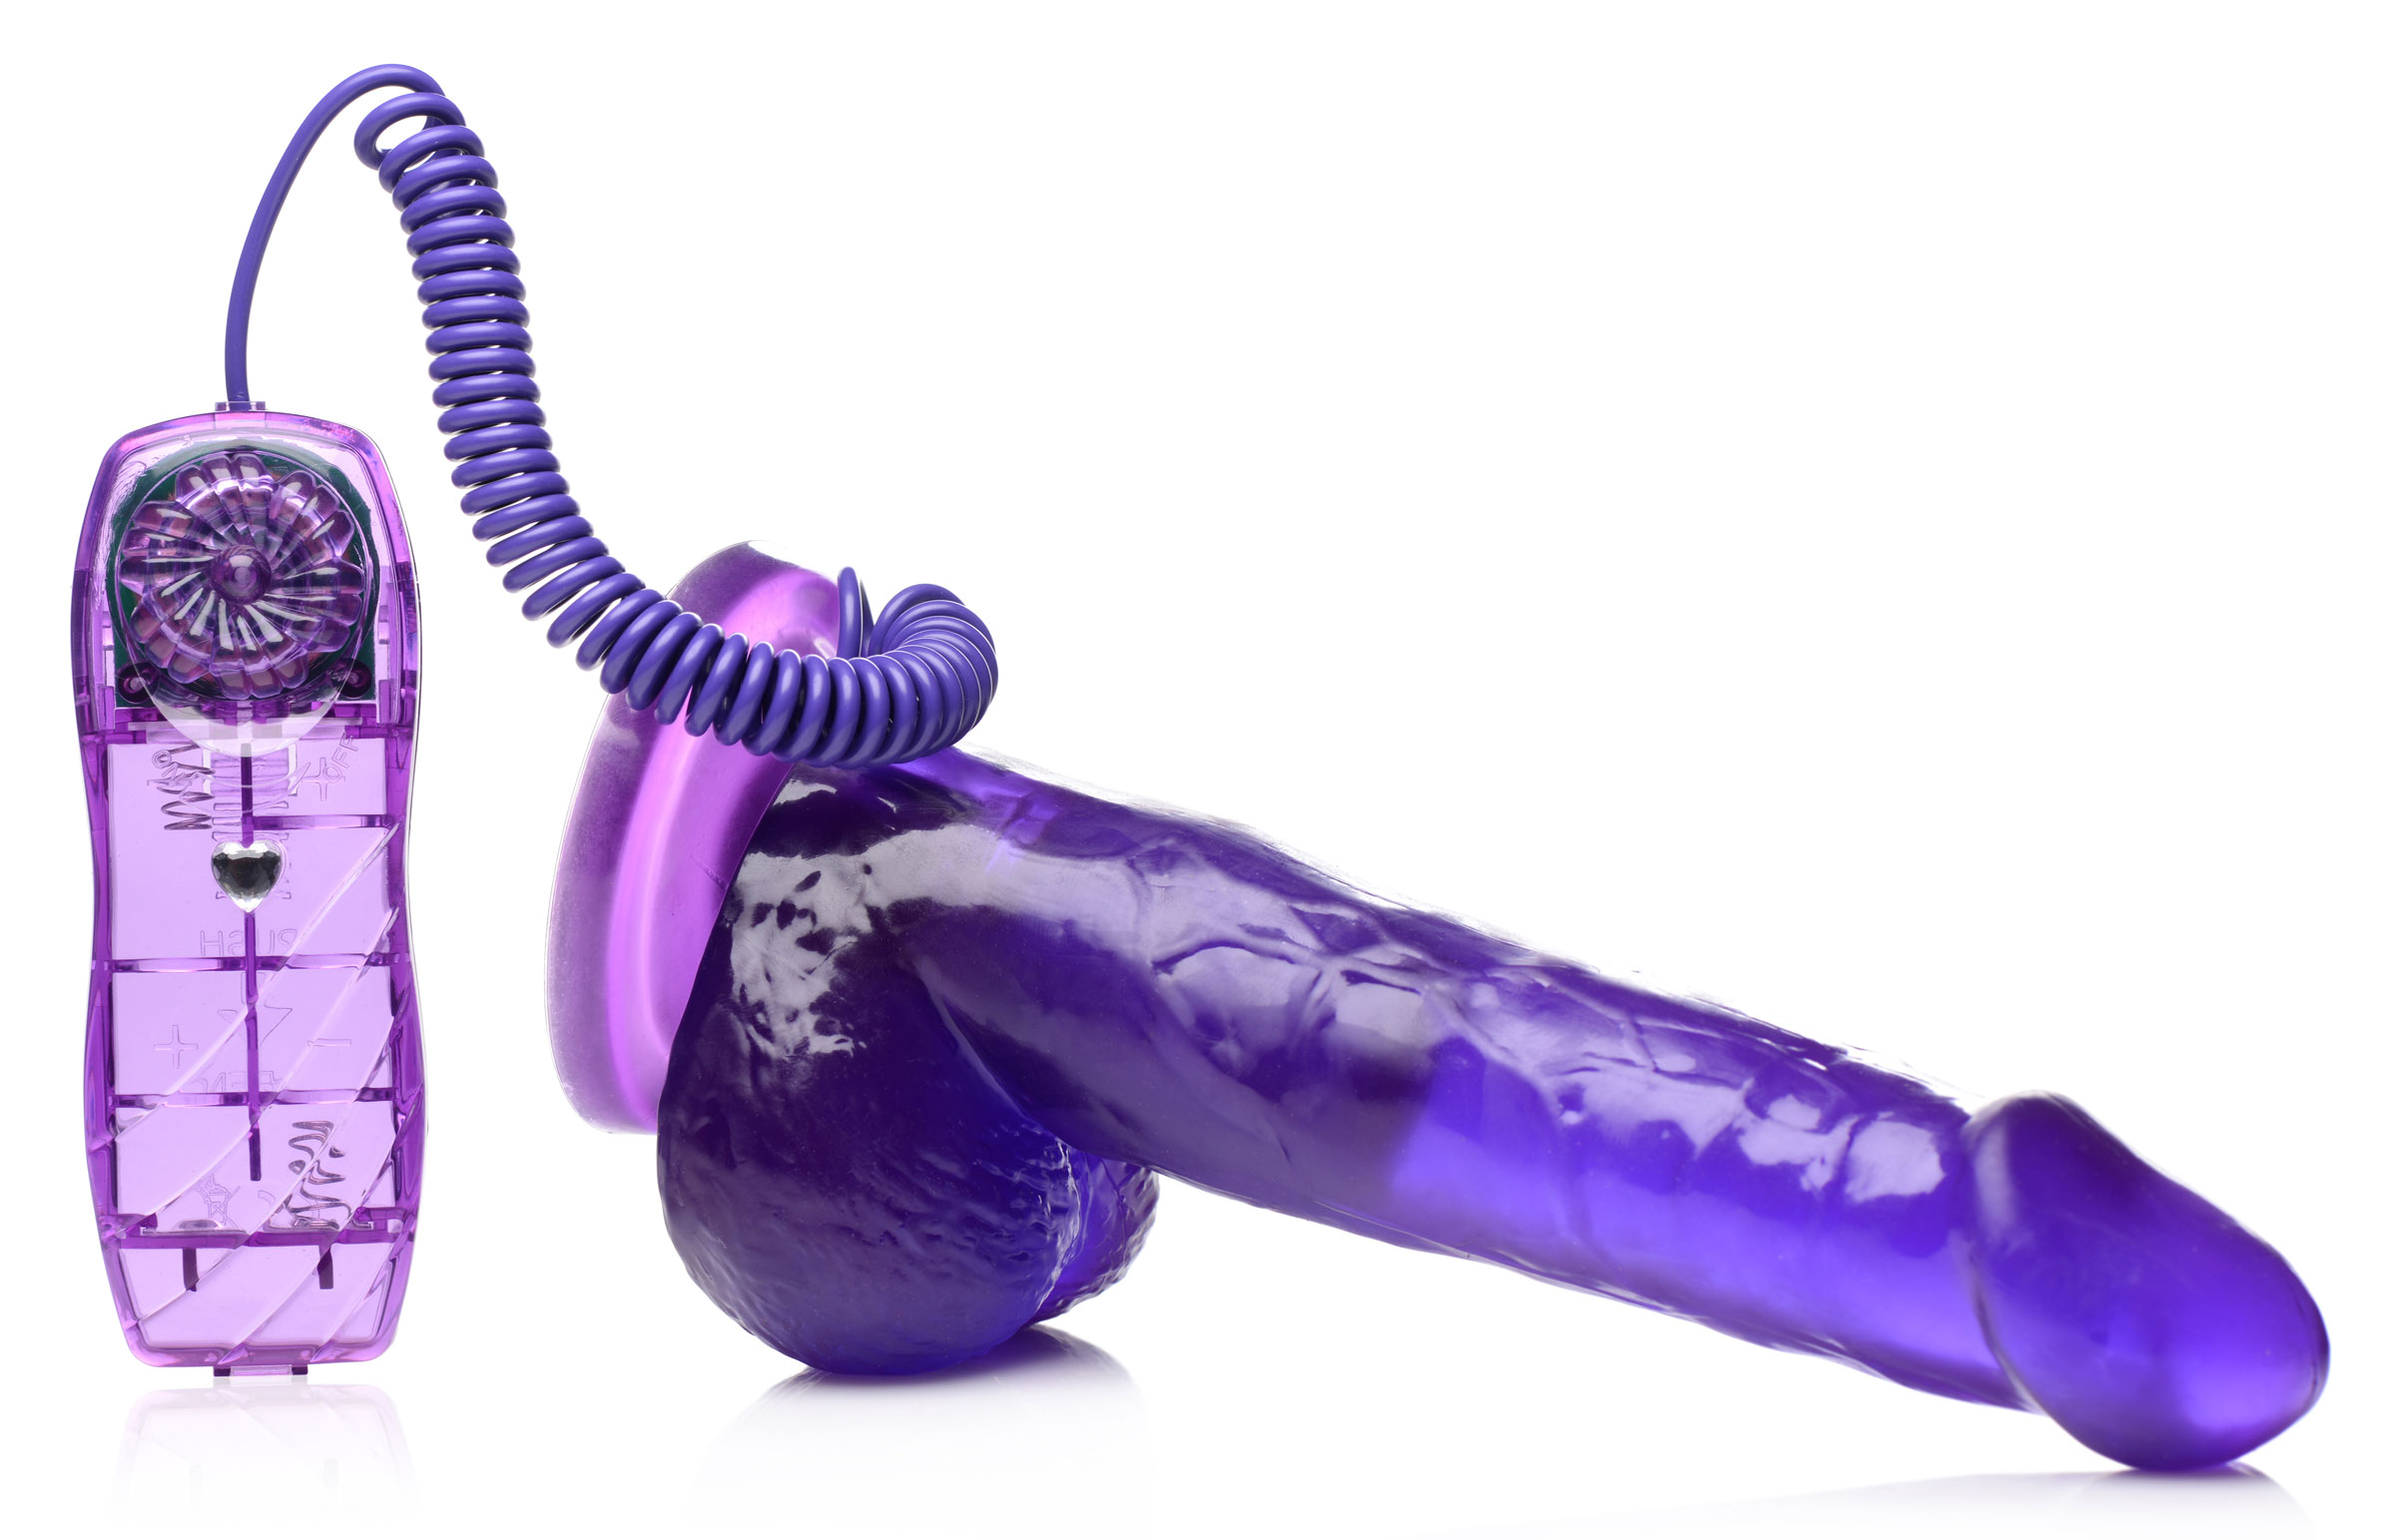 7.5 Inch Suction Cup Vibrating Dildo – Purple